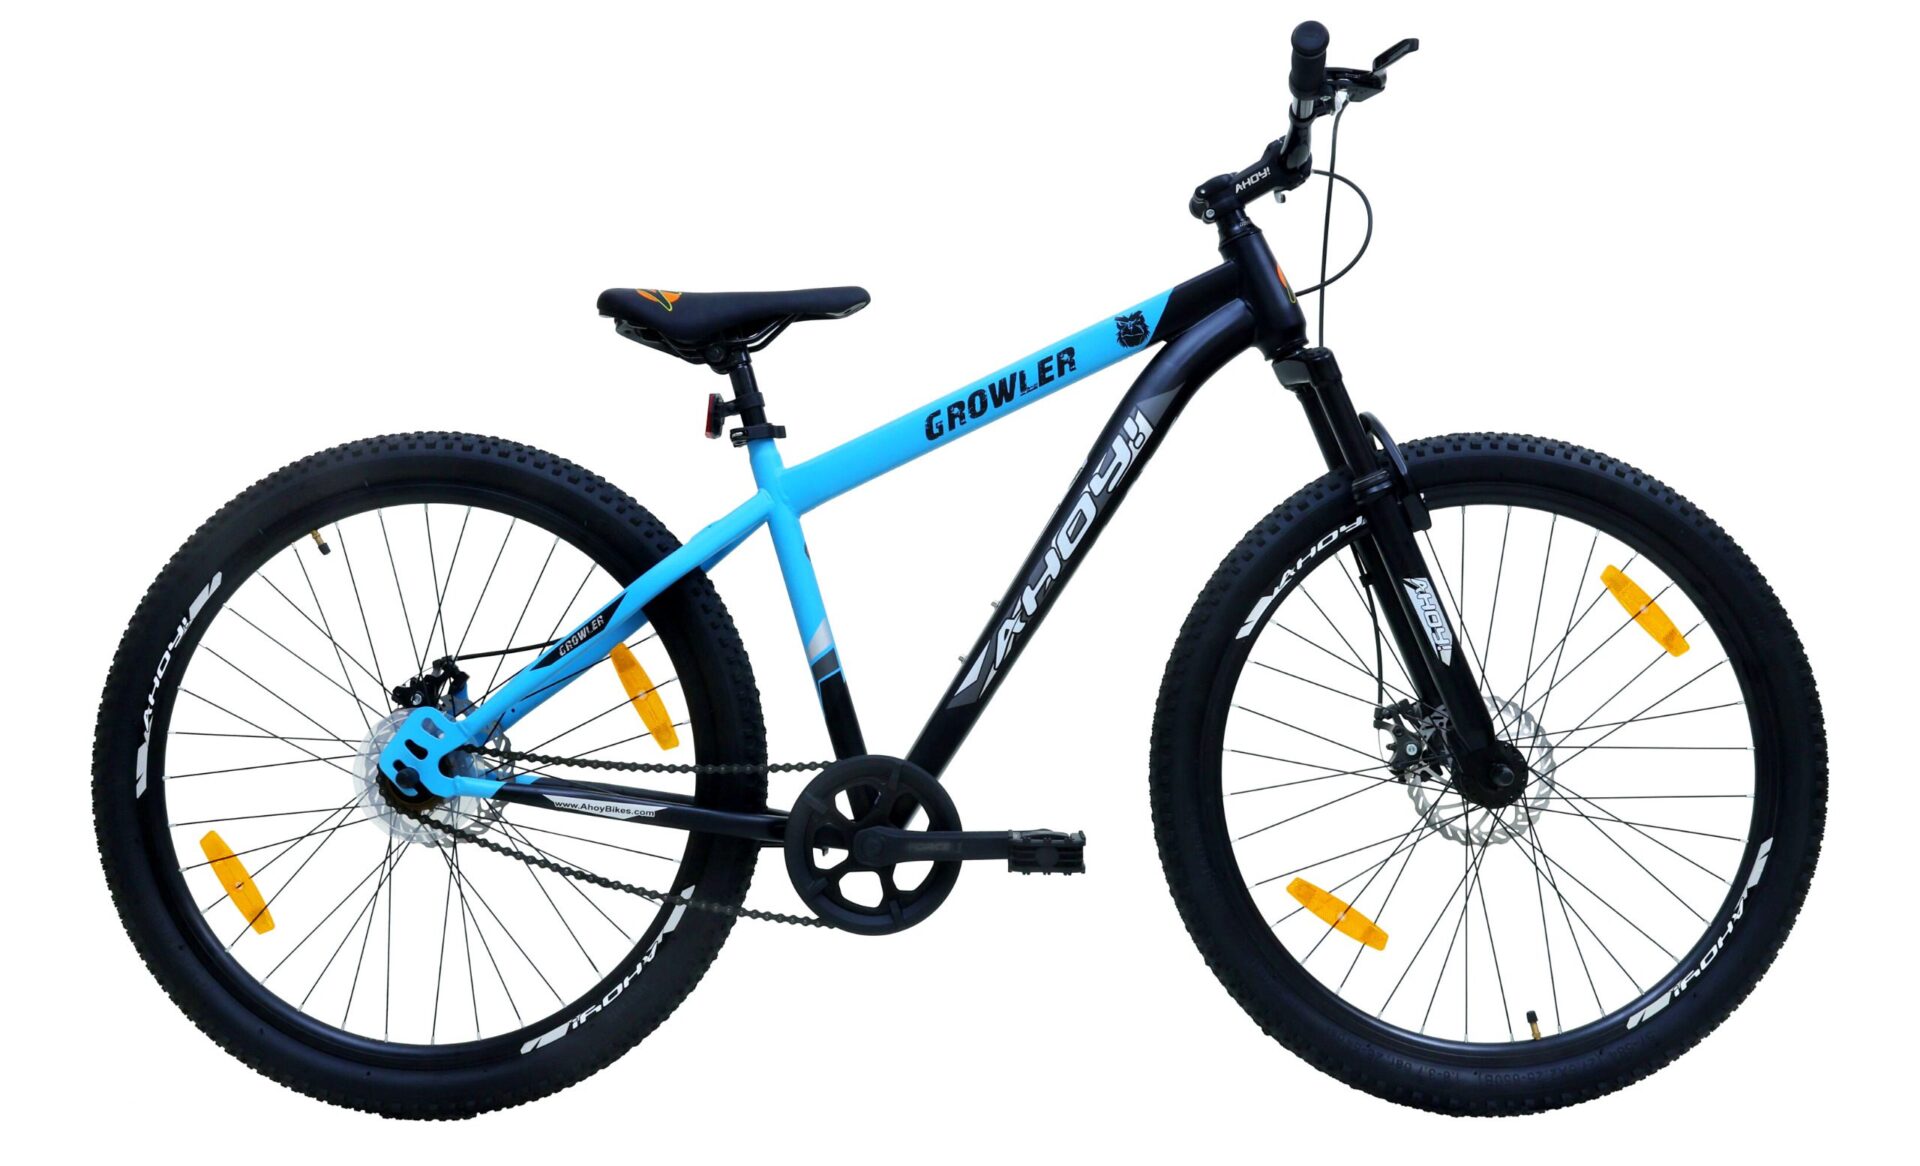 Growler cycle without gear 27.5T | buy blue non gear cycle for men